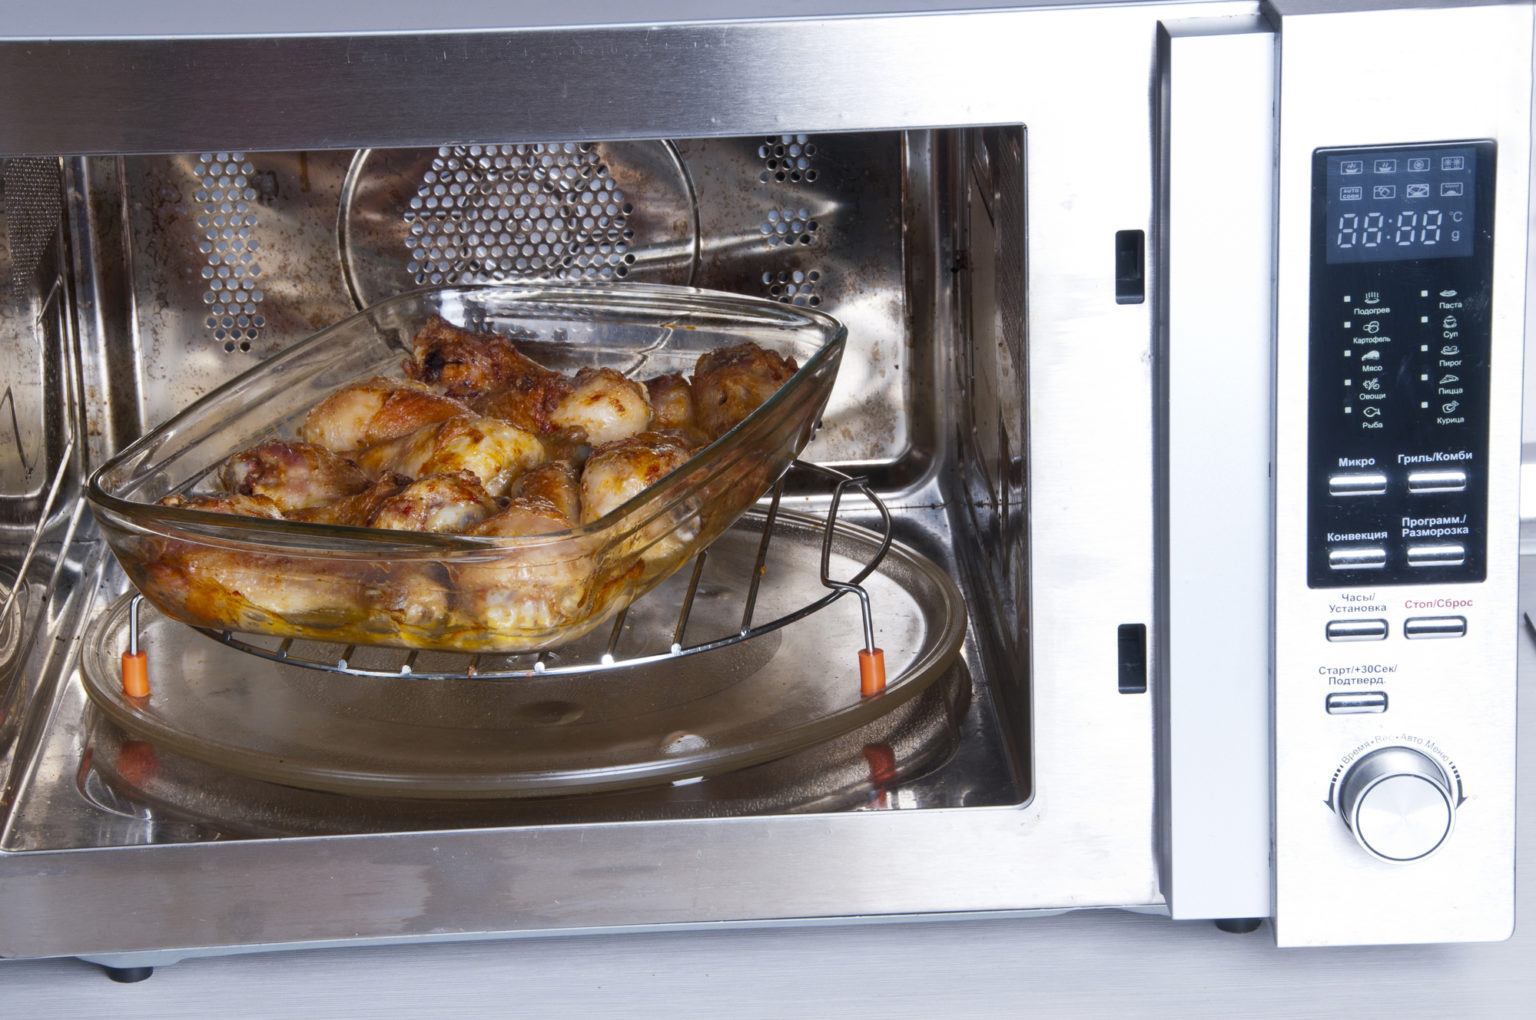 What Should I Be Cooking In My Convection Oven